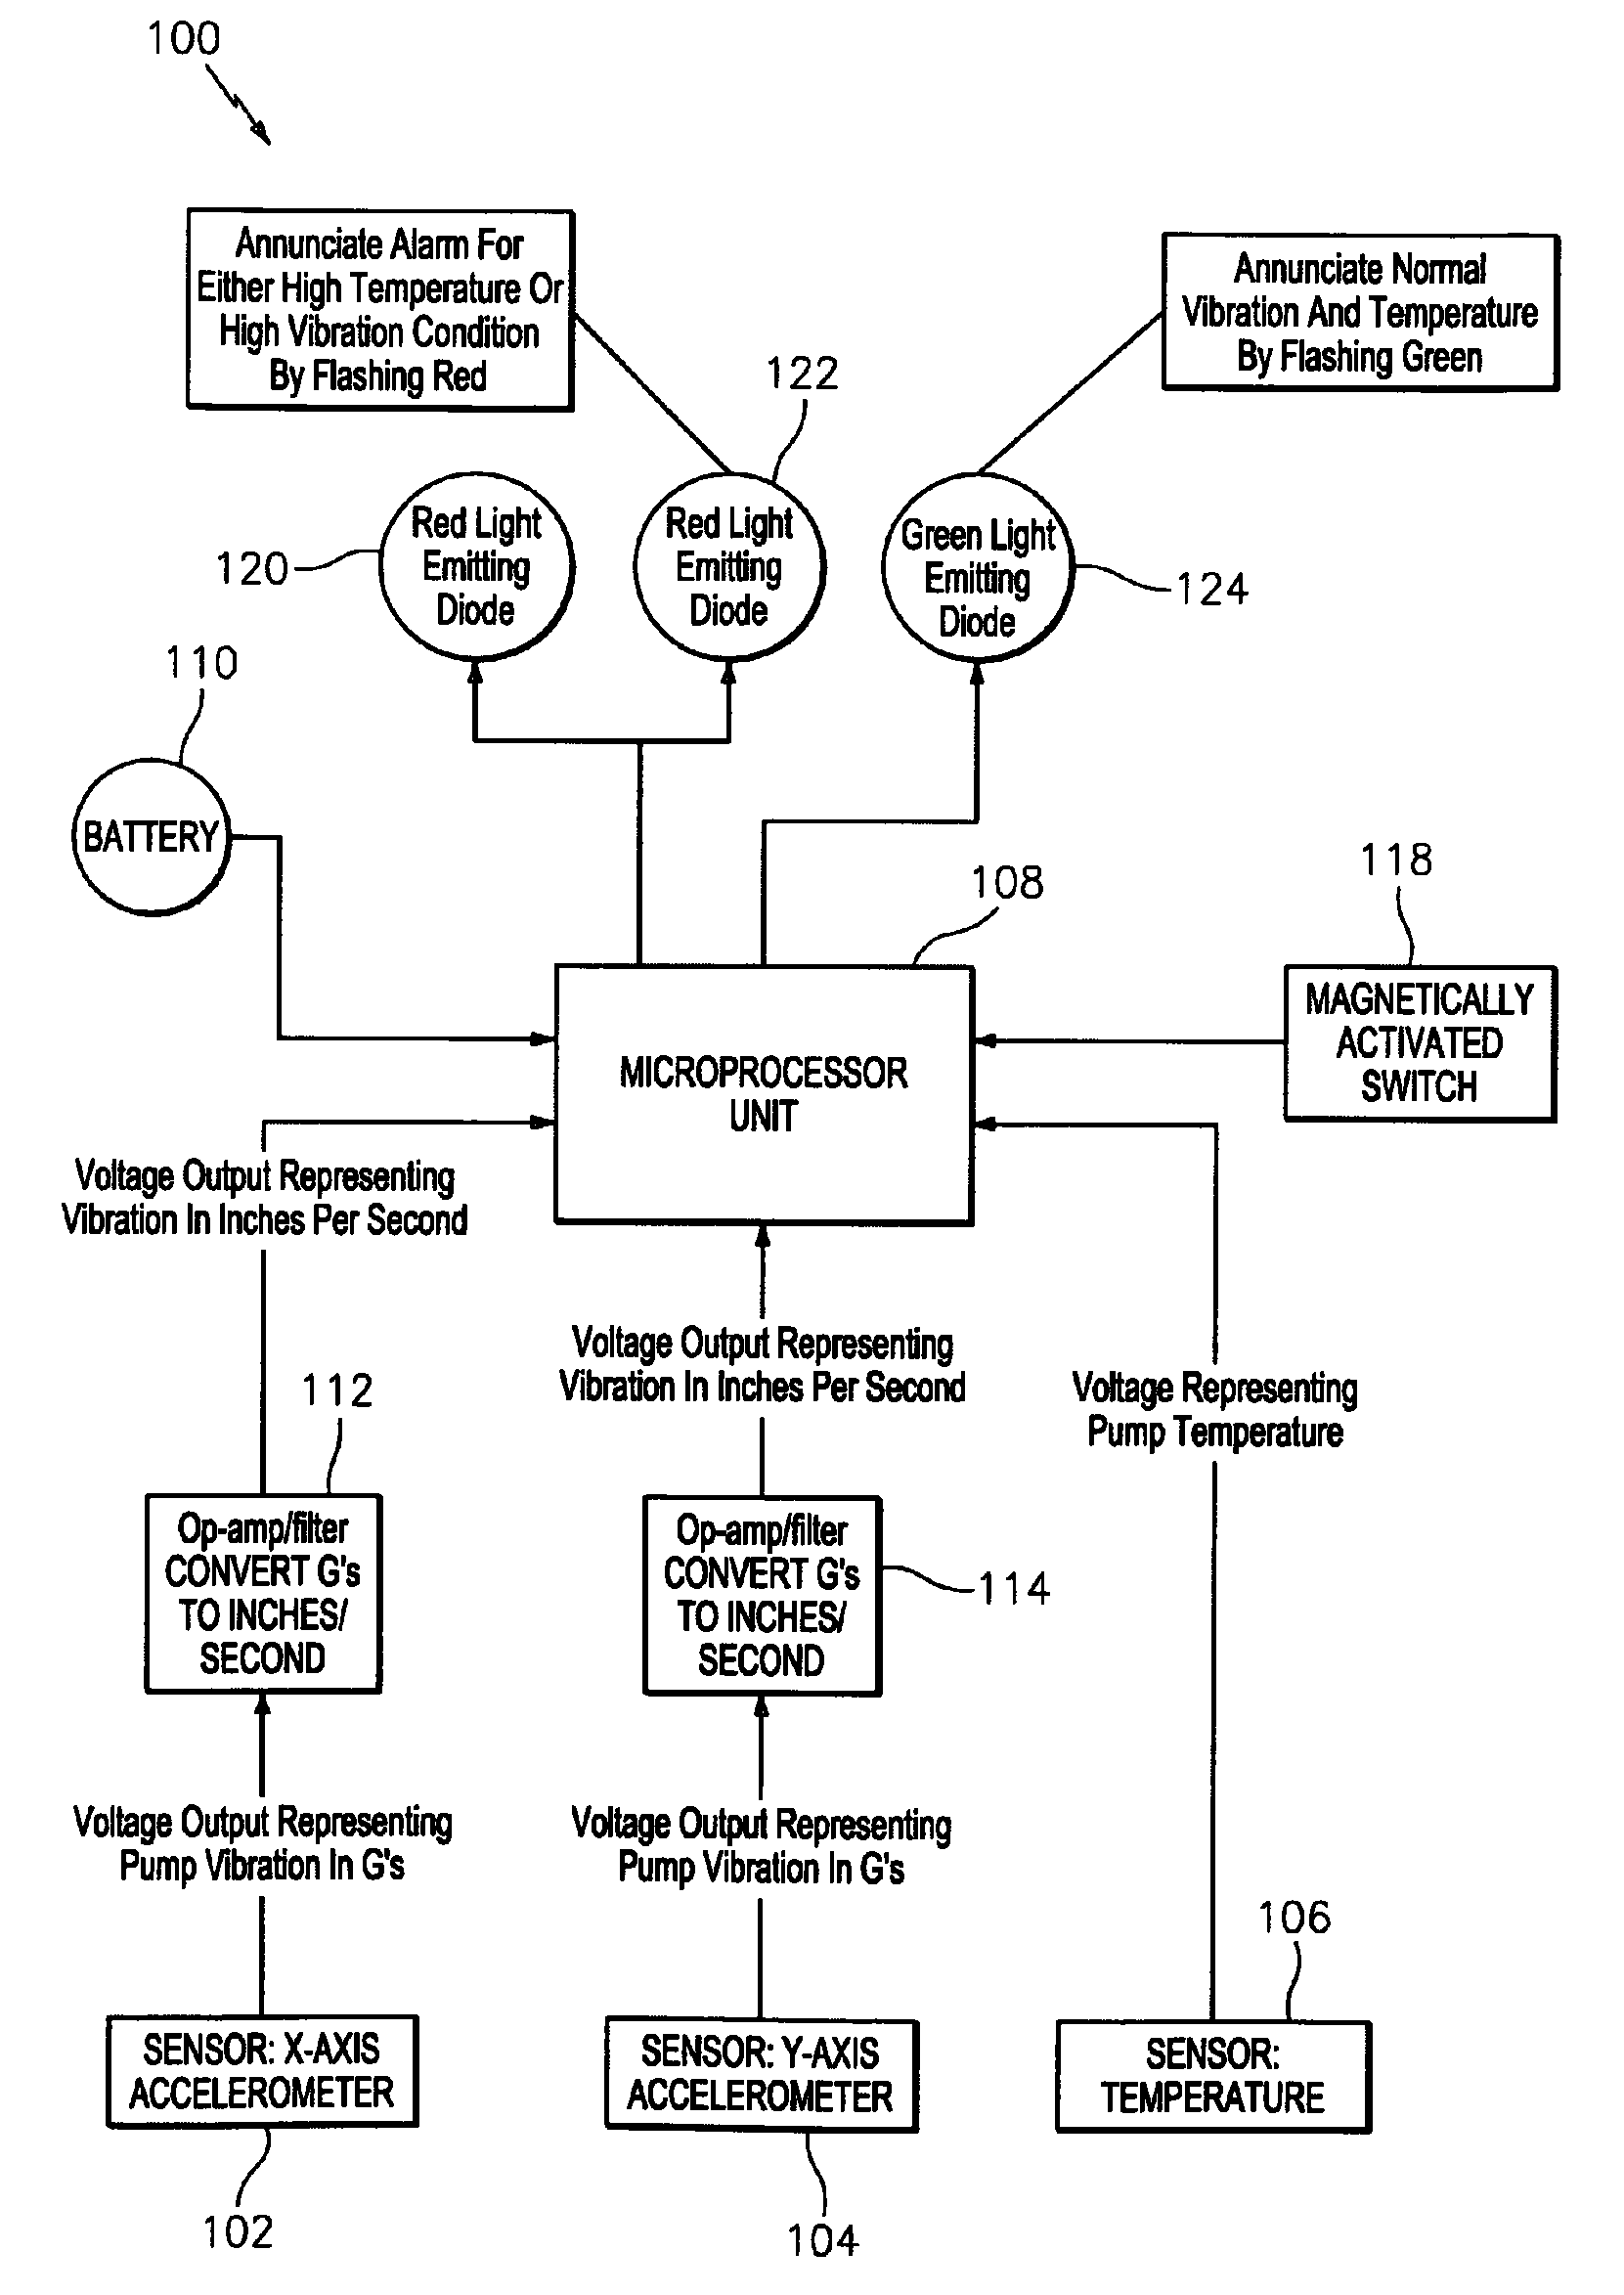 Compact self-contained condition monitoring device